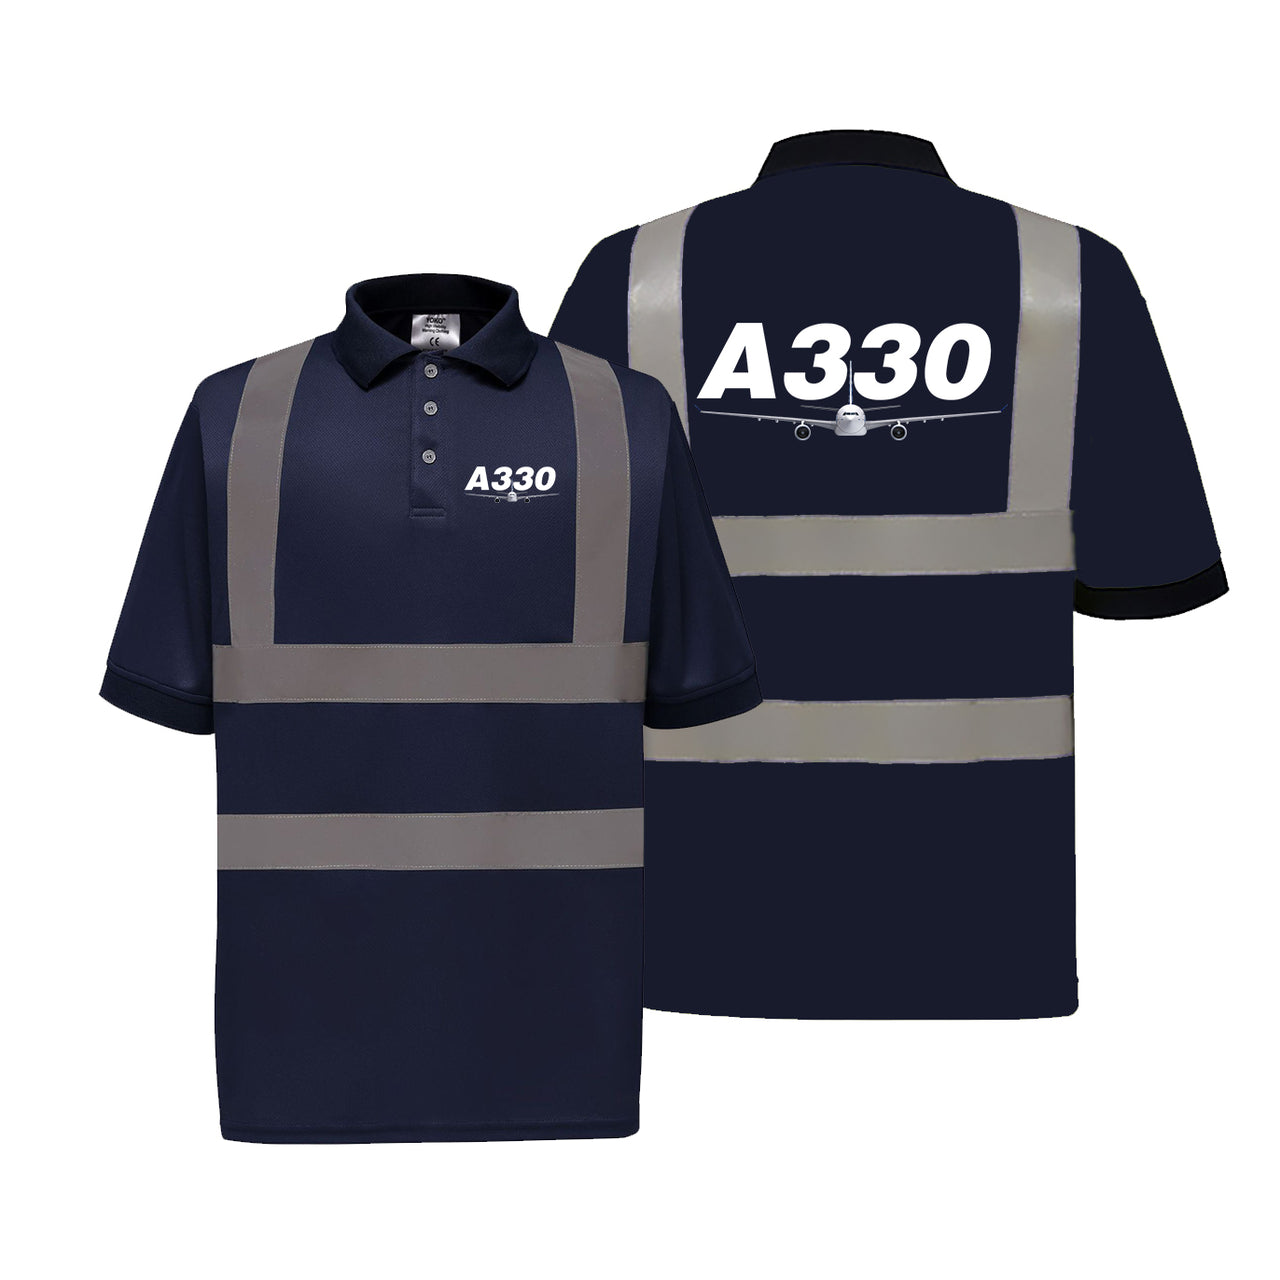 Super Airbus A330 Designed Reflective Polo T-Shirts